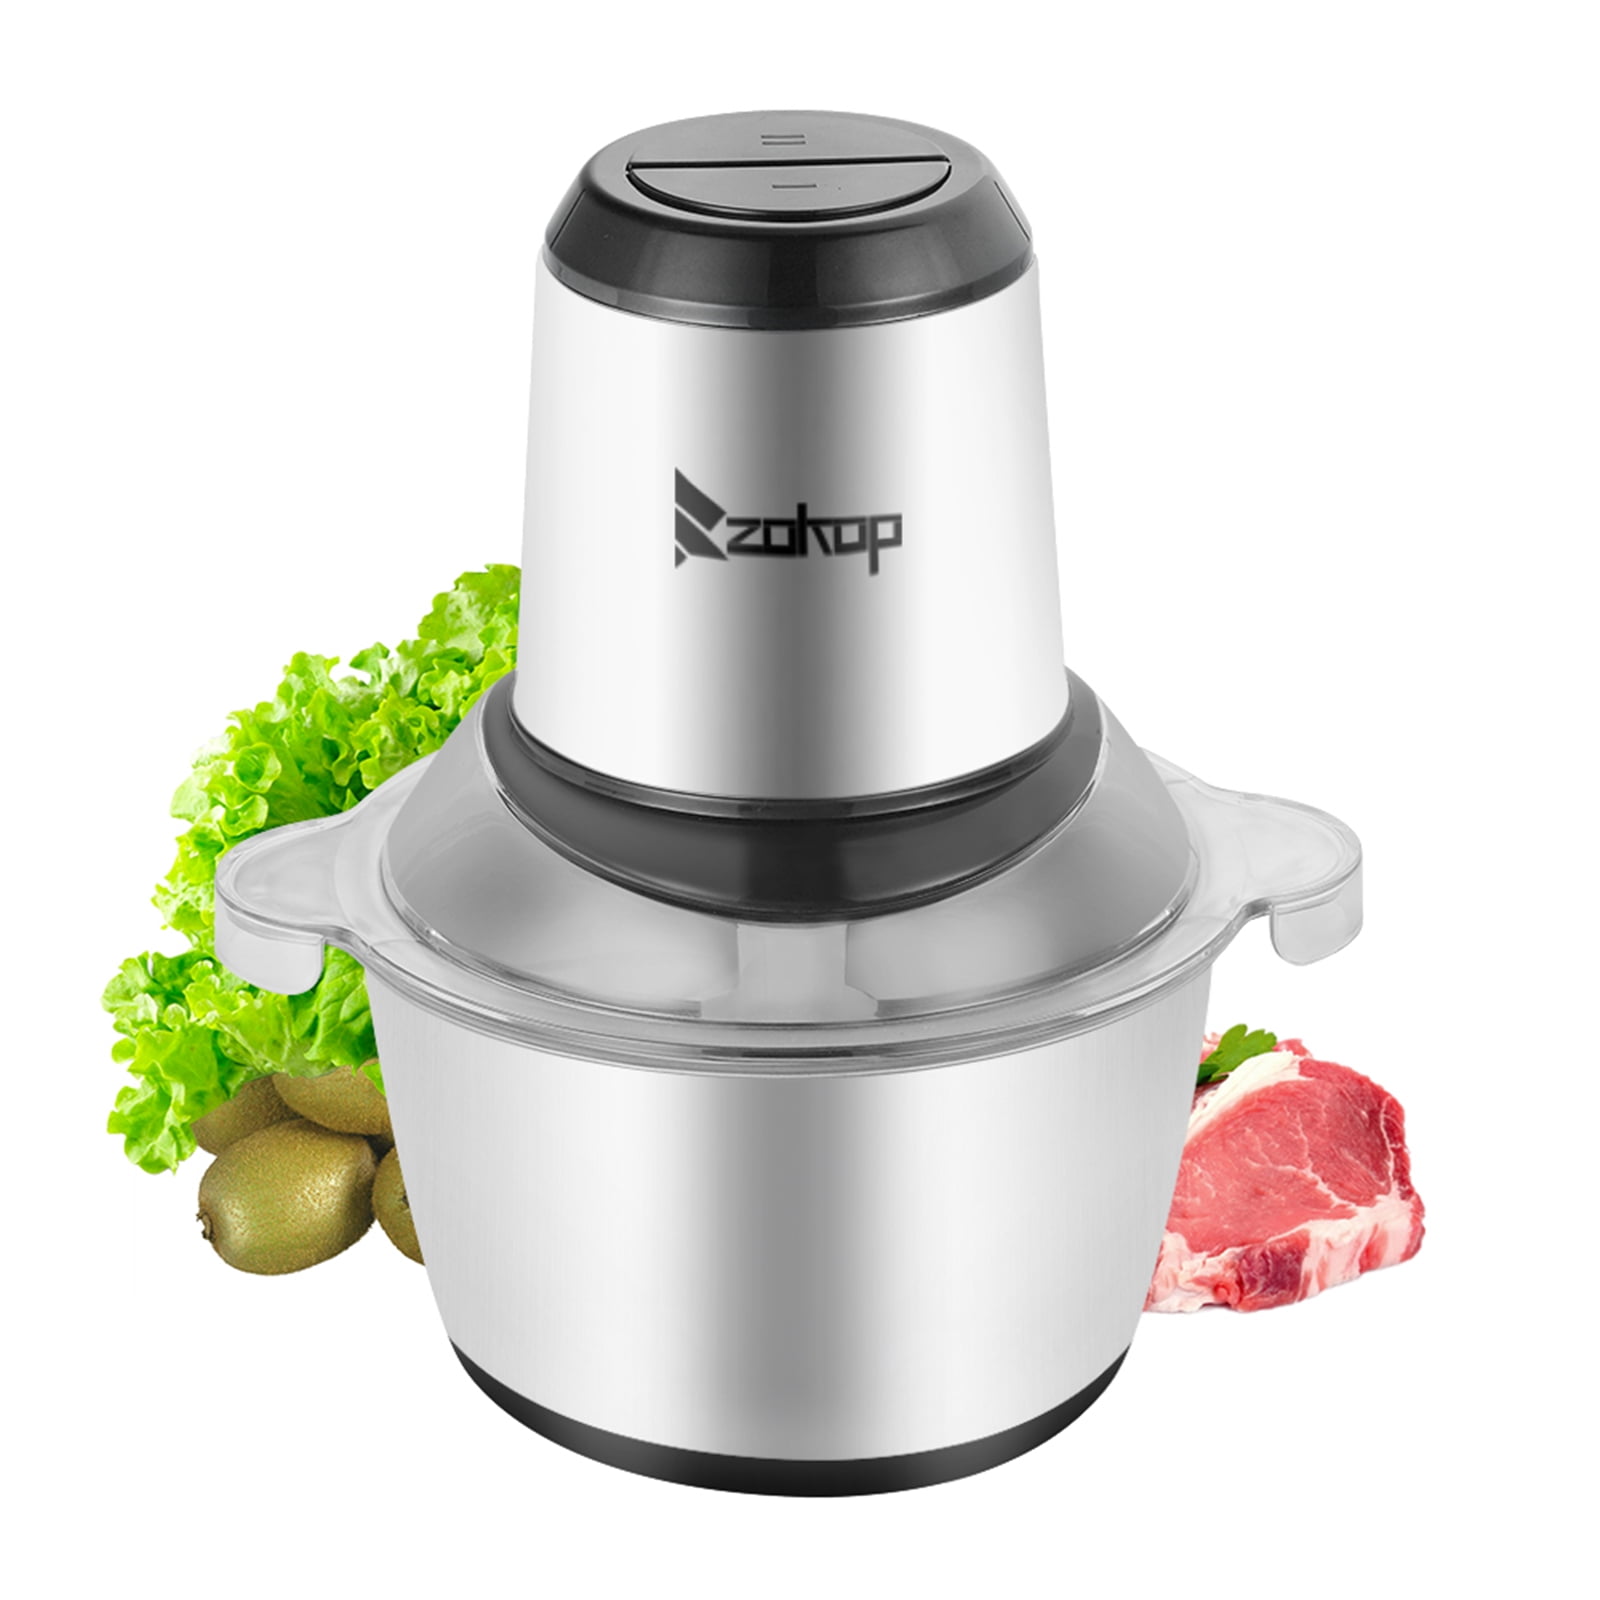 Details about   Electric Meat Grinder Home Kitchen Industrial Stainless Steel Sausage Maker 2L 